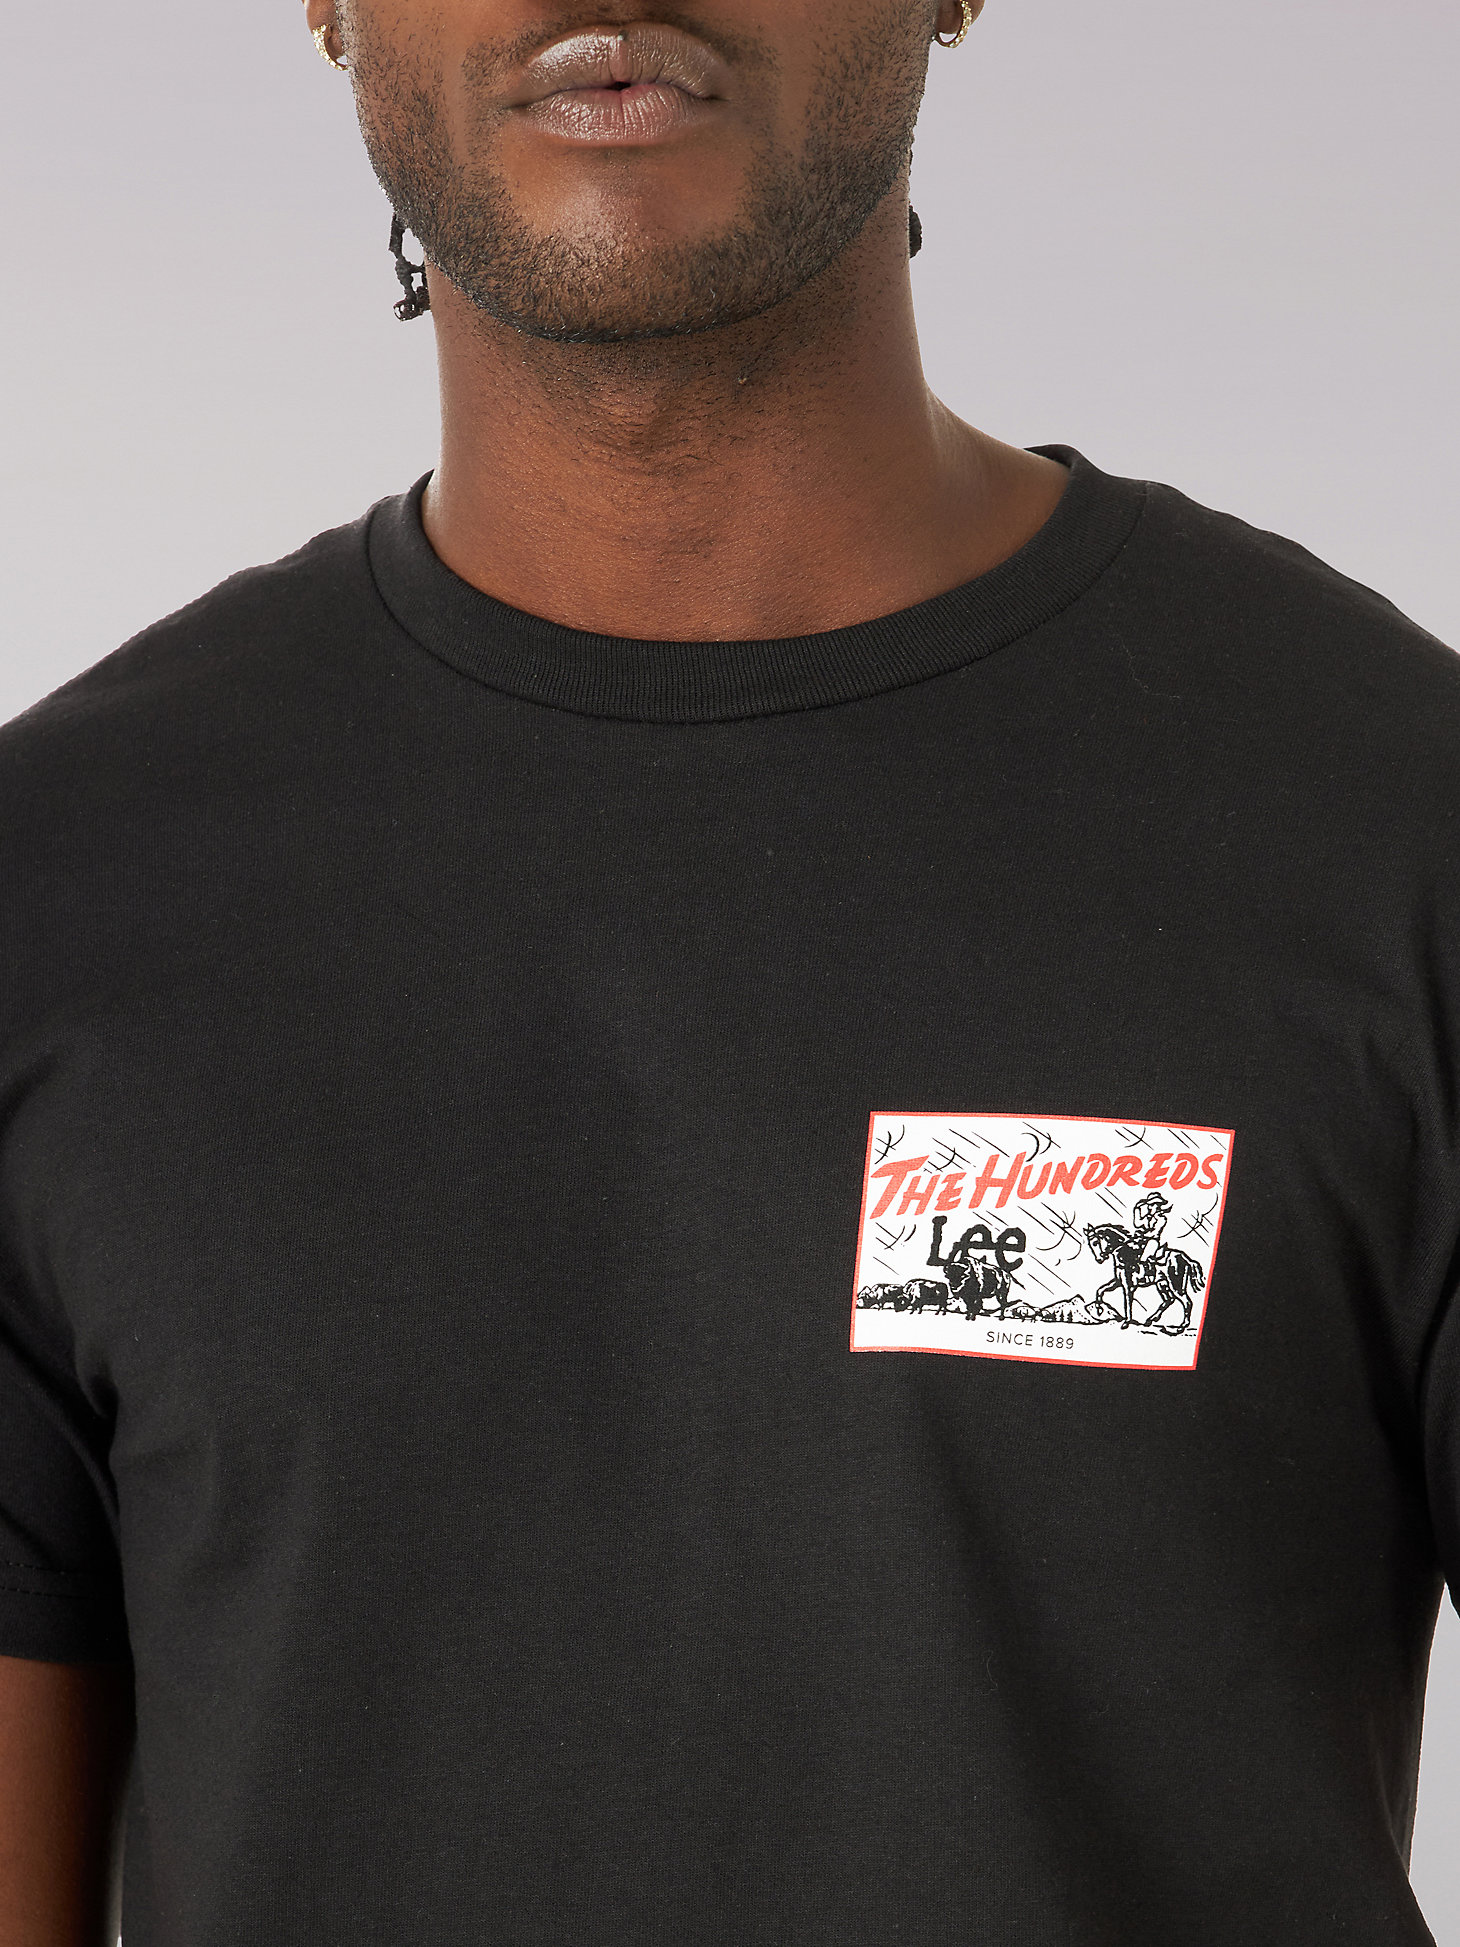 Men's Lee® x The Hundreds® Storm Rider Graphic Tee in Black alternative view 2